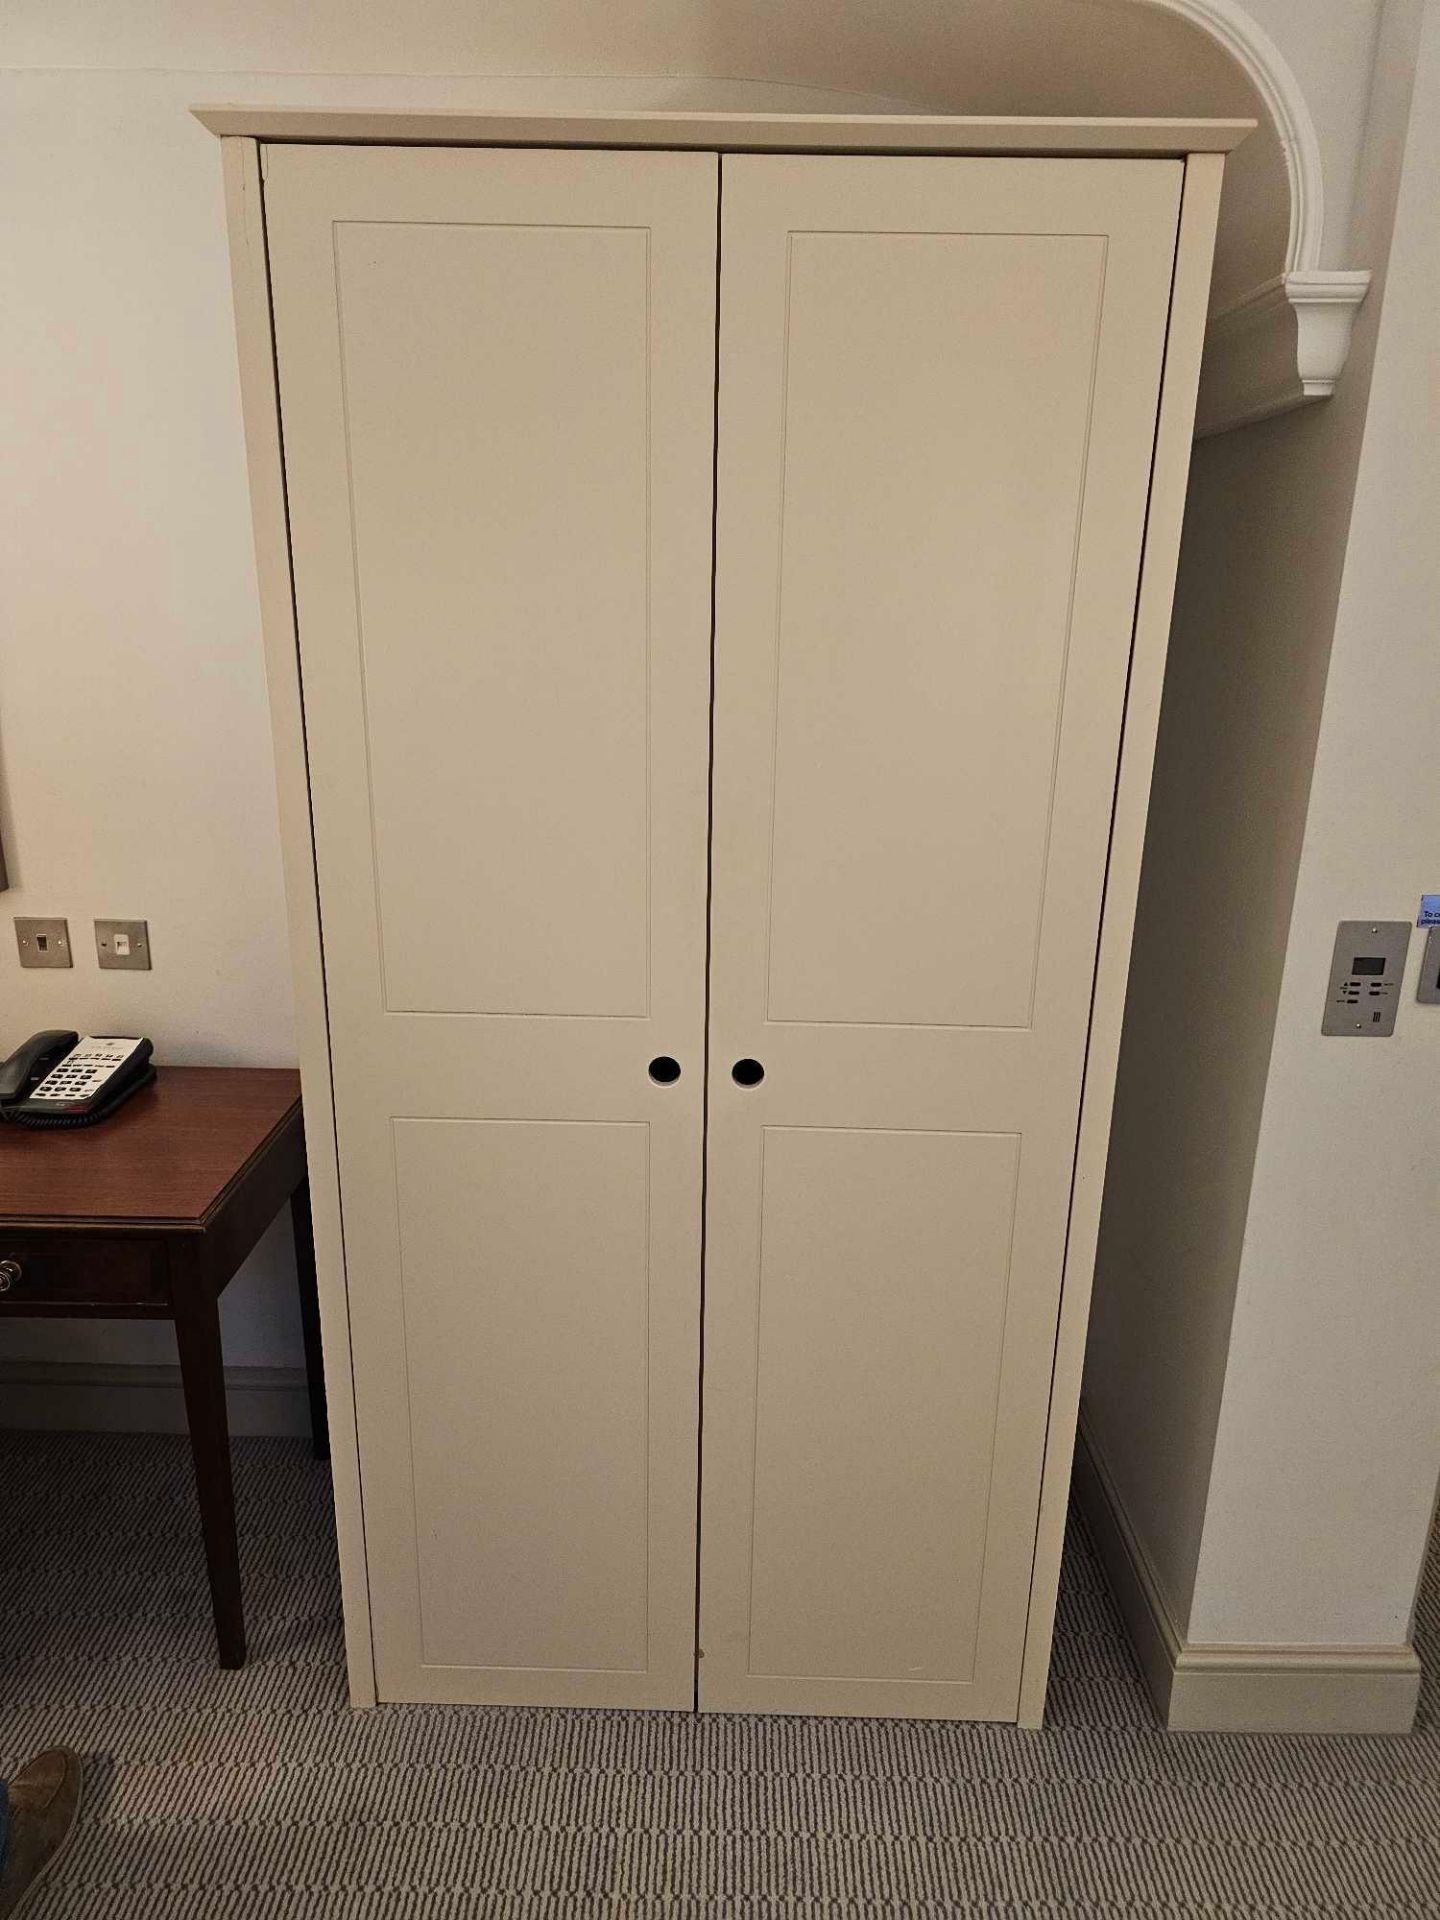 A Contemporary Two Door Wardrobe Gardenia White Finish Internally Fitted With Shelving And Chrome